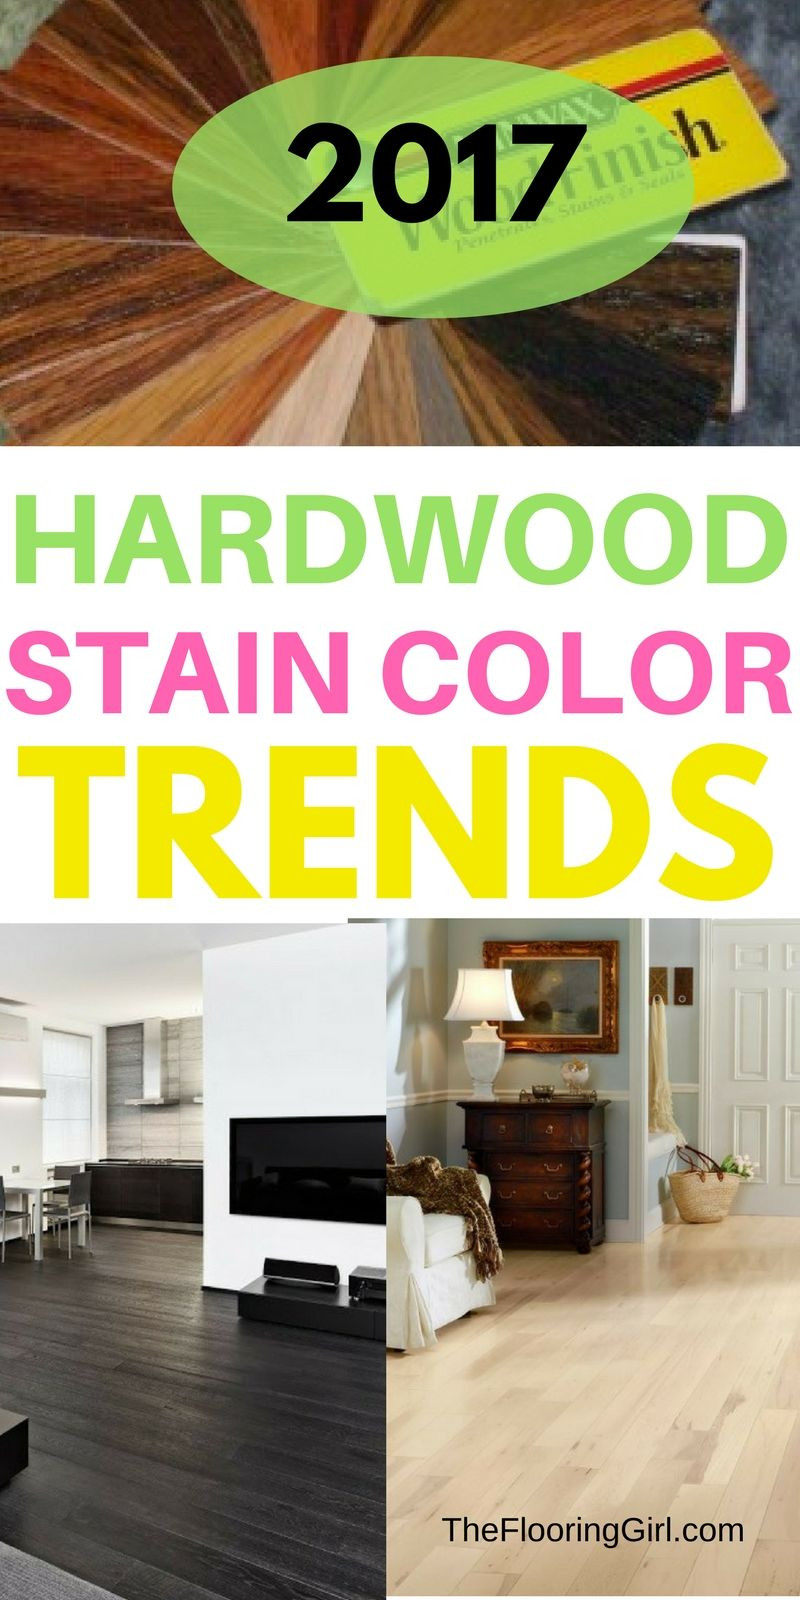 10 Recommended Hardwood Flooring Faq 2024 free download hardwood flooring faq of hardwood flooring stain color trends 2018 more from the flooring with regard to hardwood flooring stain color trends for 2017 hardwood colors that are in style thefl